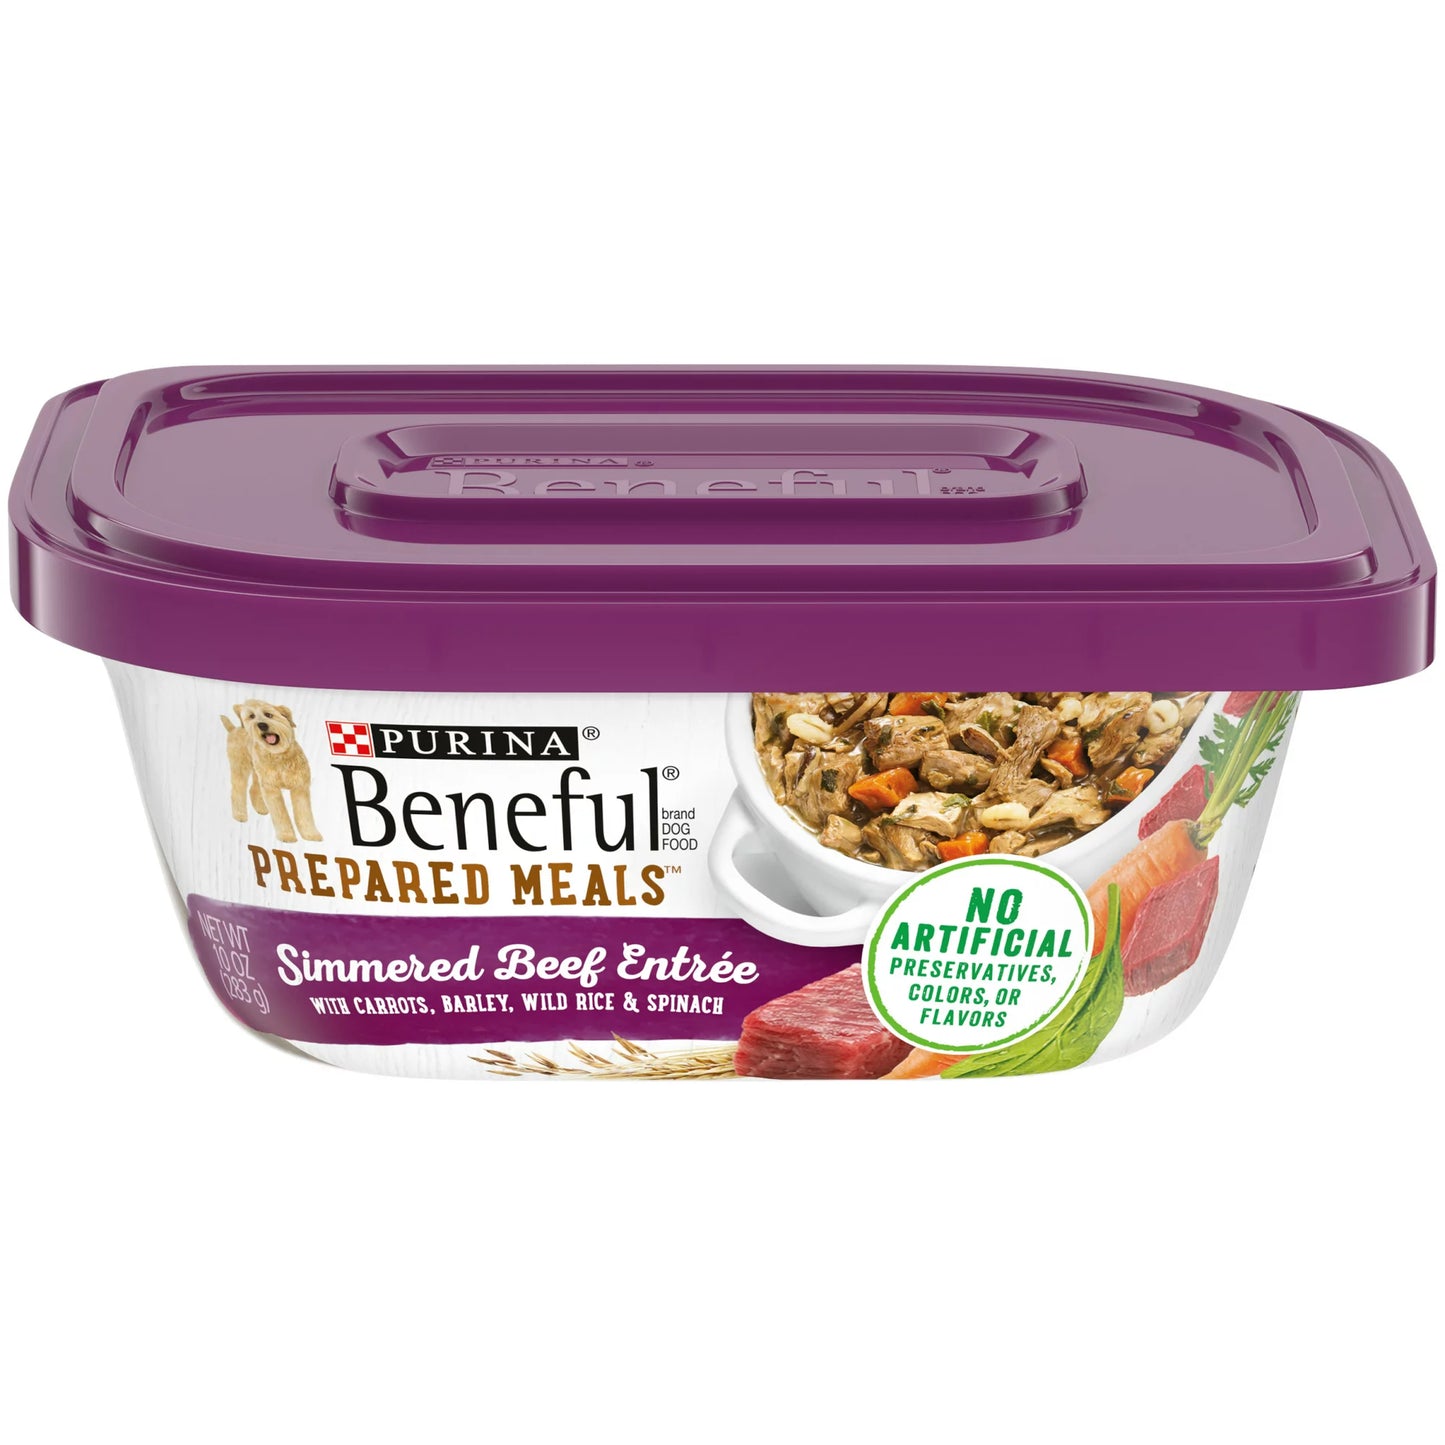 BENEFUL SIMMERED BEEF 10OZ